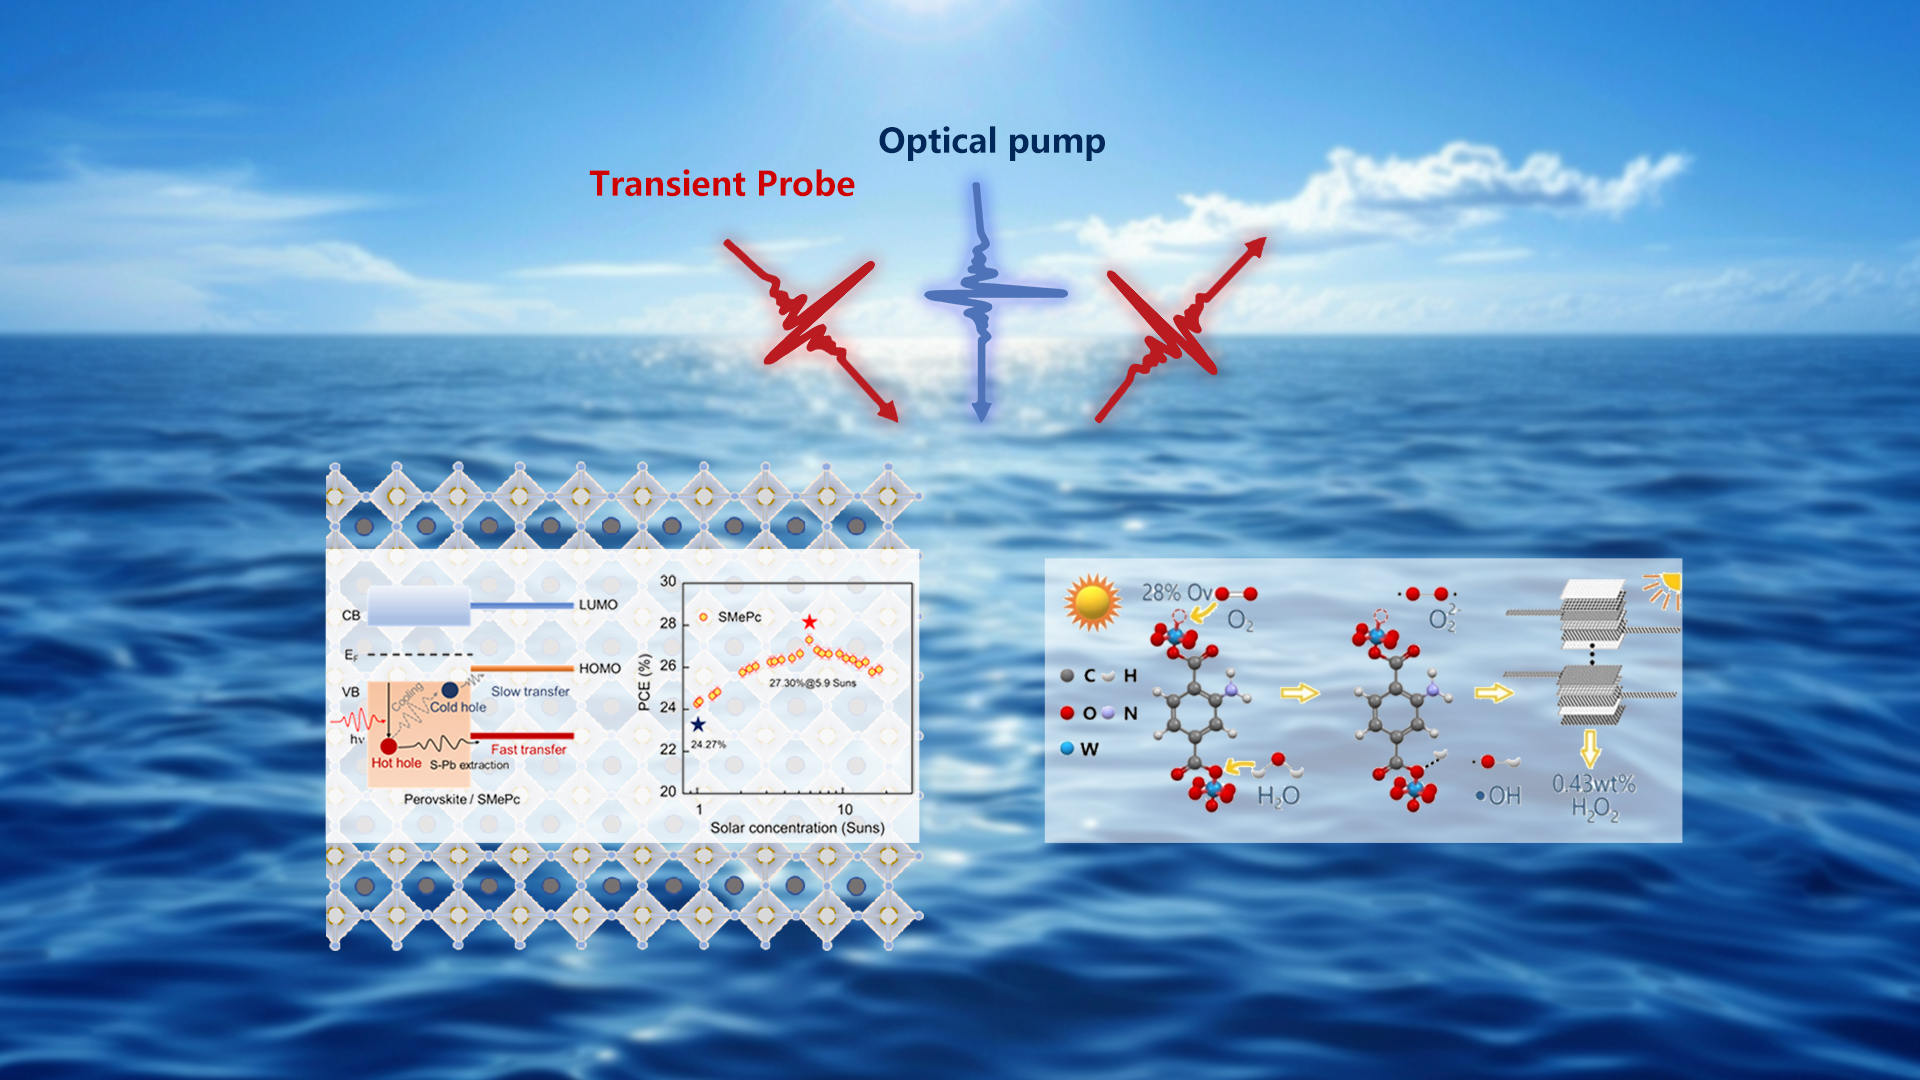 Researchers achieve breakthrough in solar cell and photocatalysis efficiency through ultrafast dynamics understanding